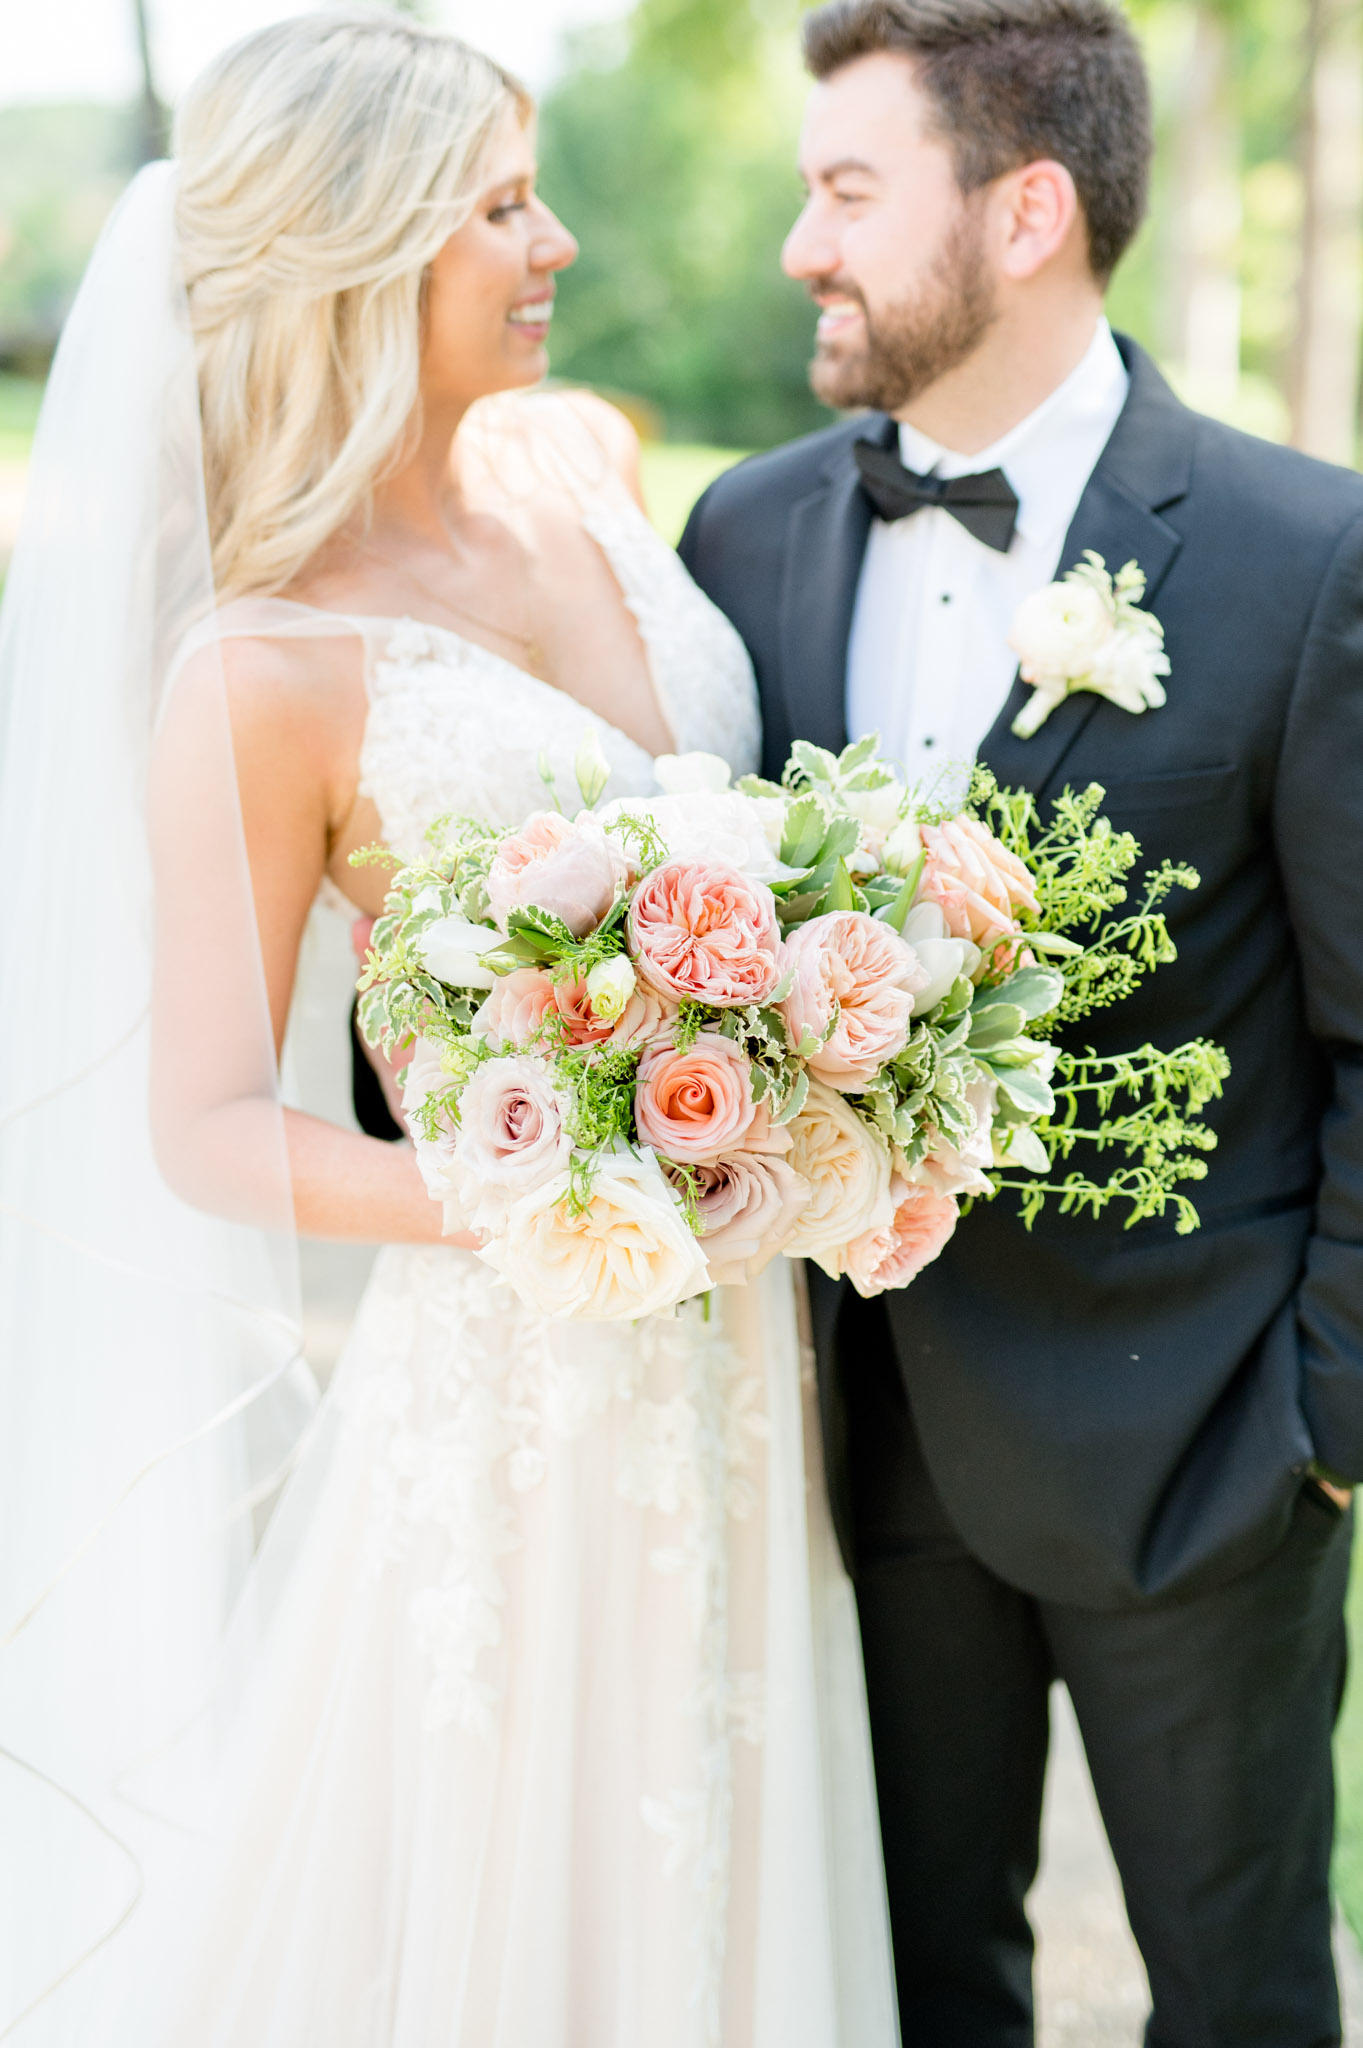 Closeup of bridal bouquet and bride and groom.